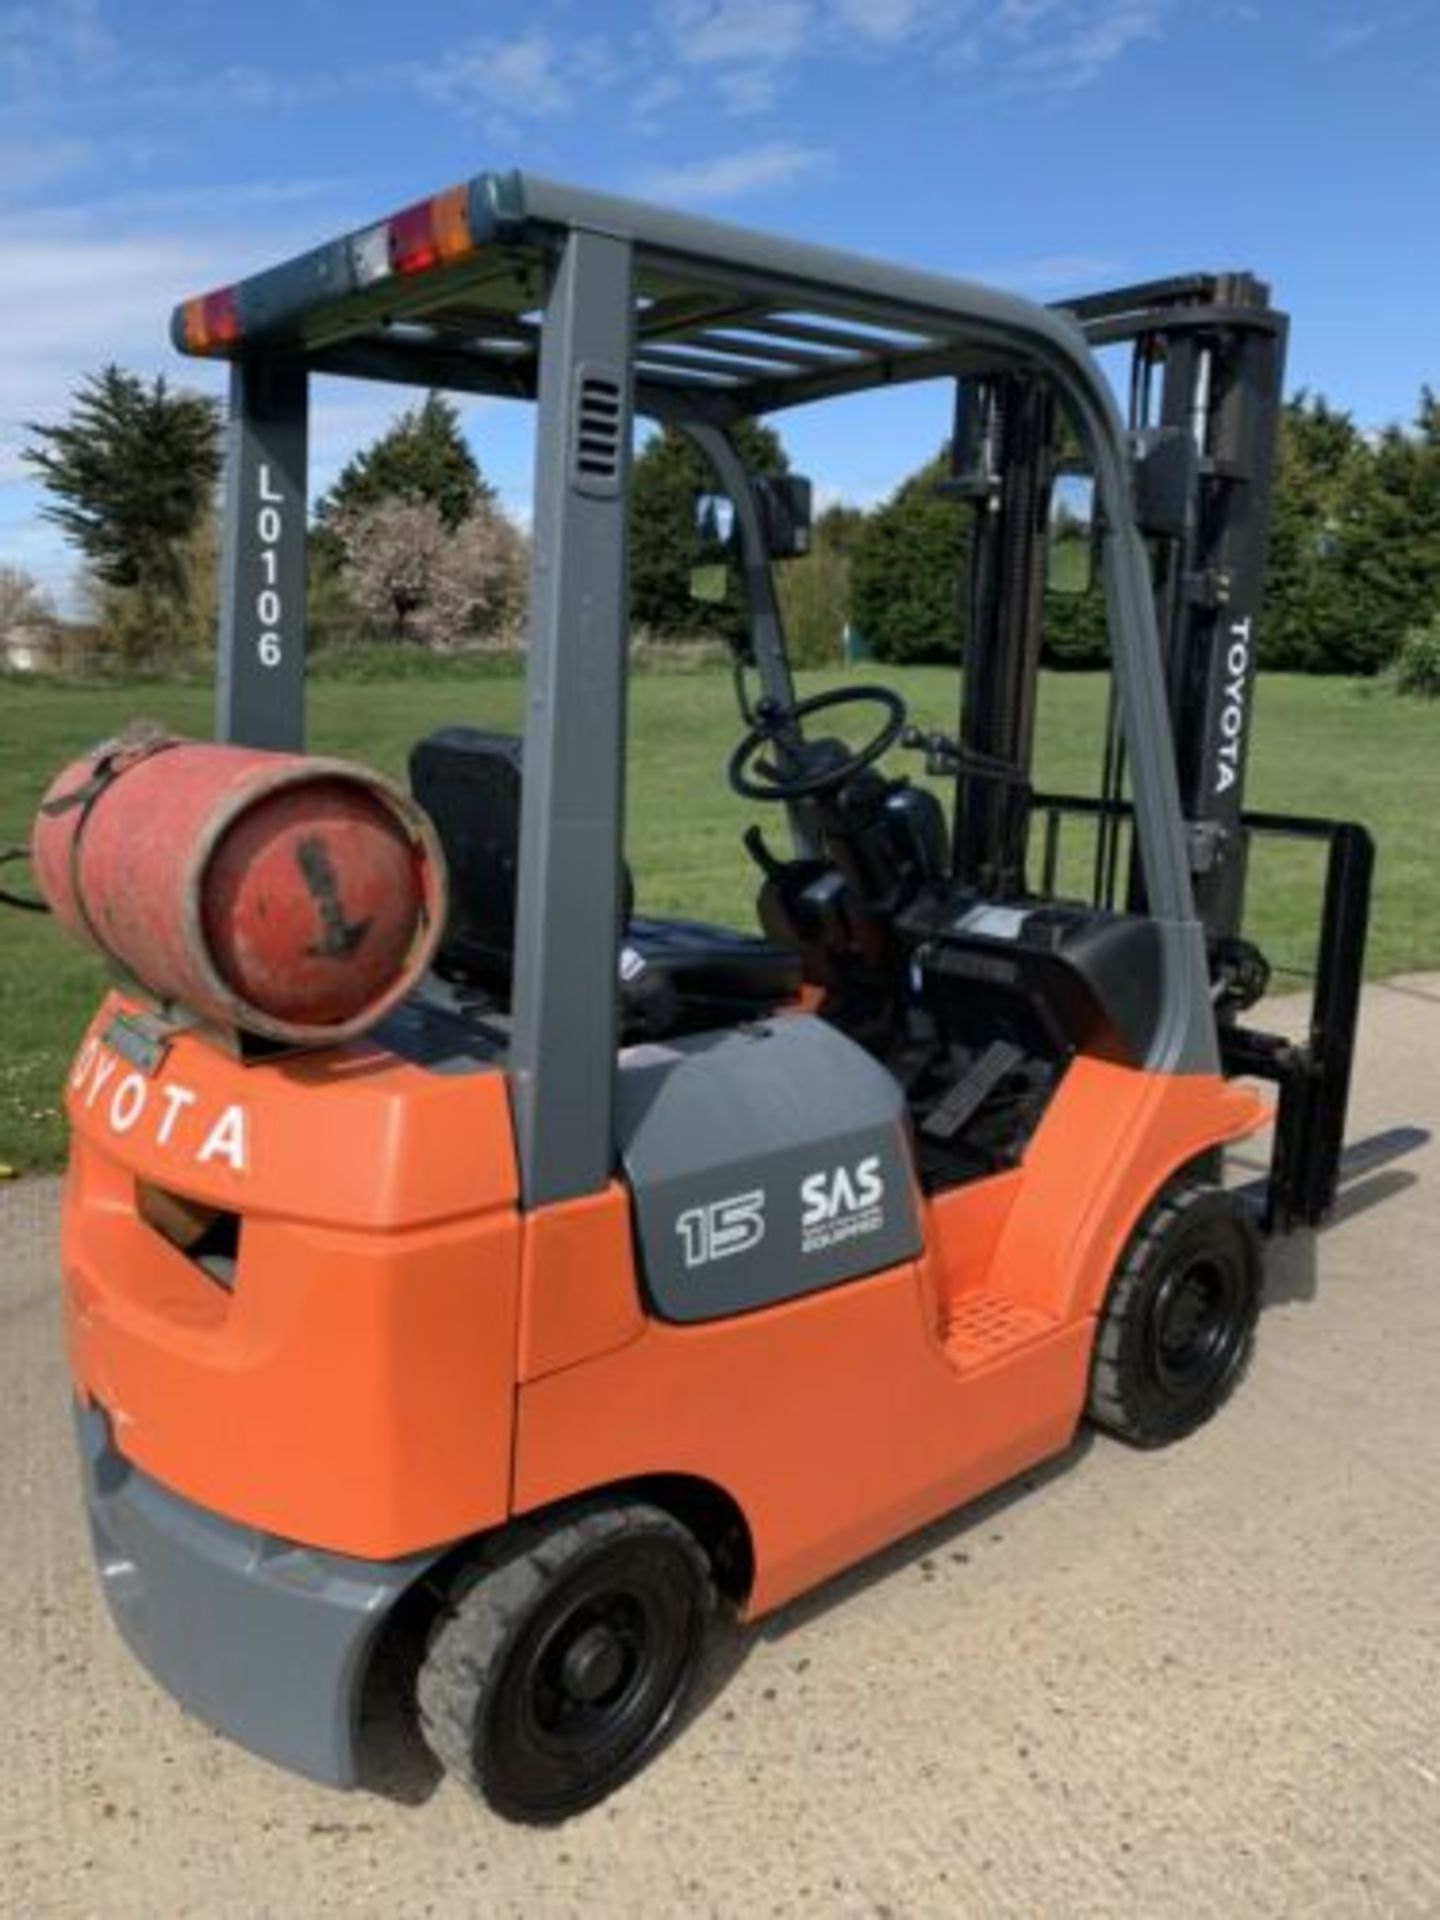 Toyota 1.5 Tonne Gas Forklift Truck - Image 4 of 6